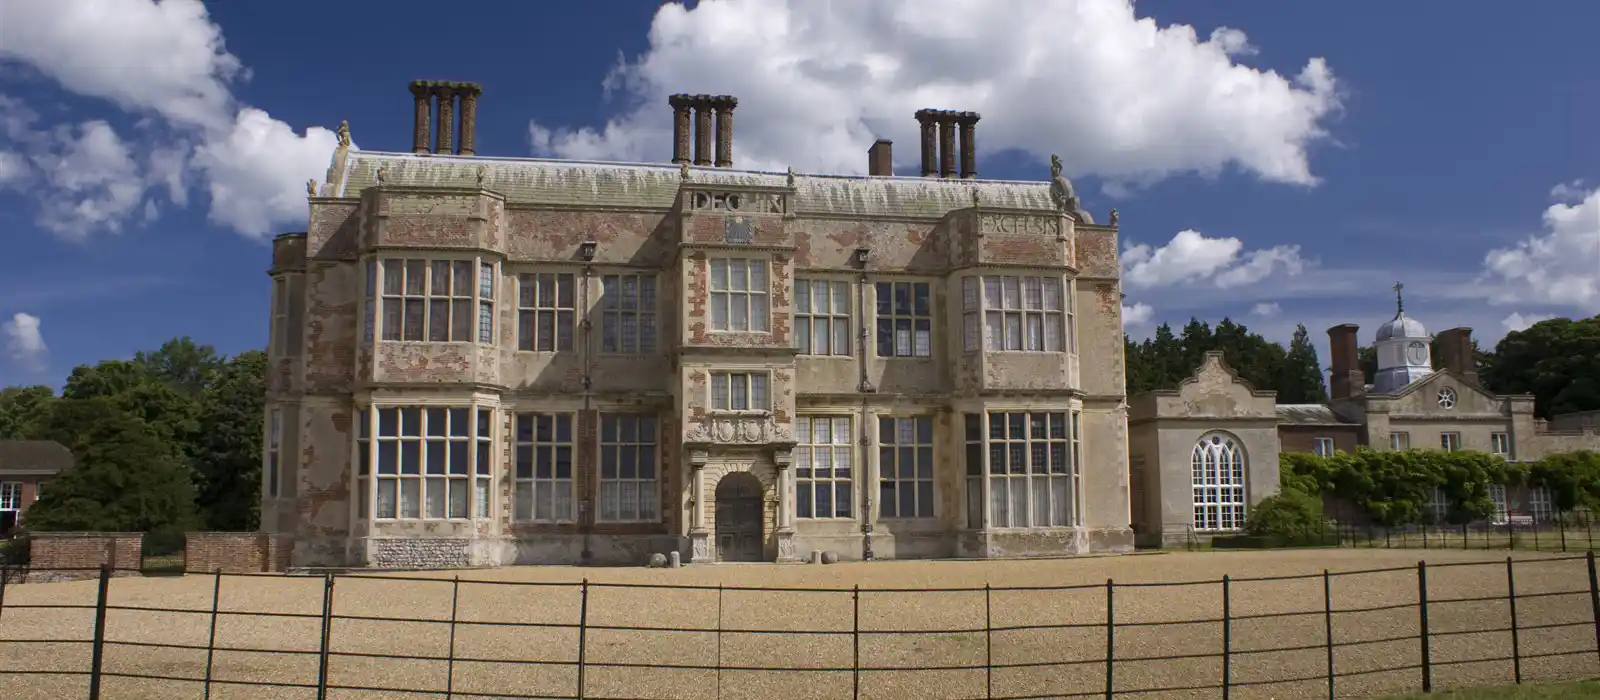 The supposedly haunted Felbrigg Hall in Norfolk